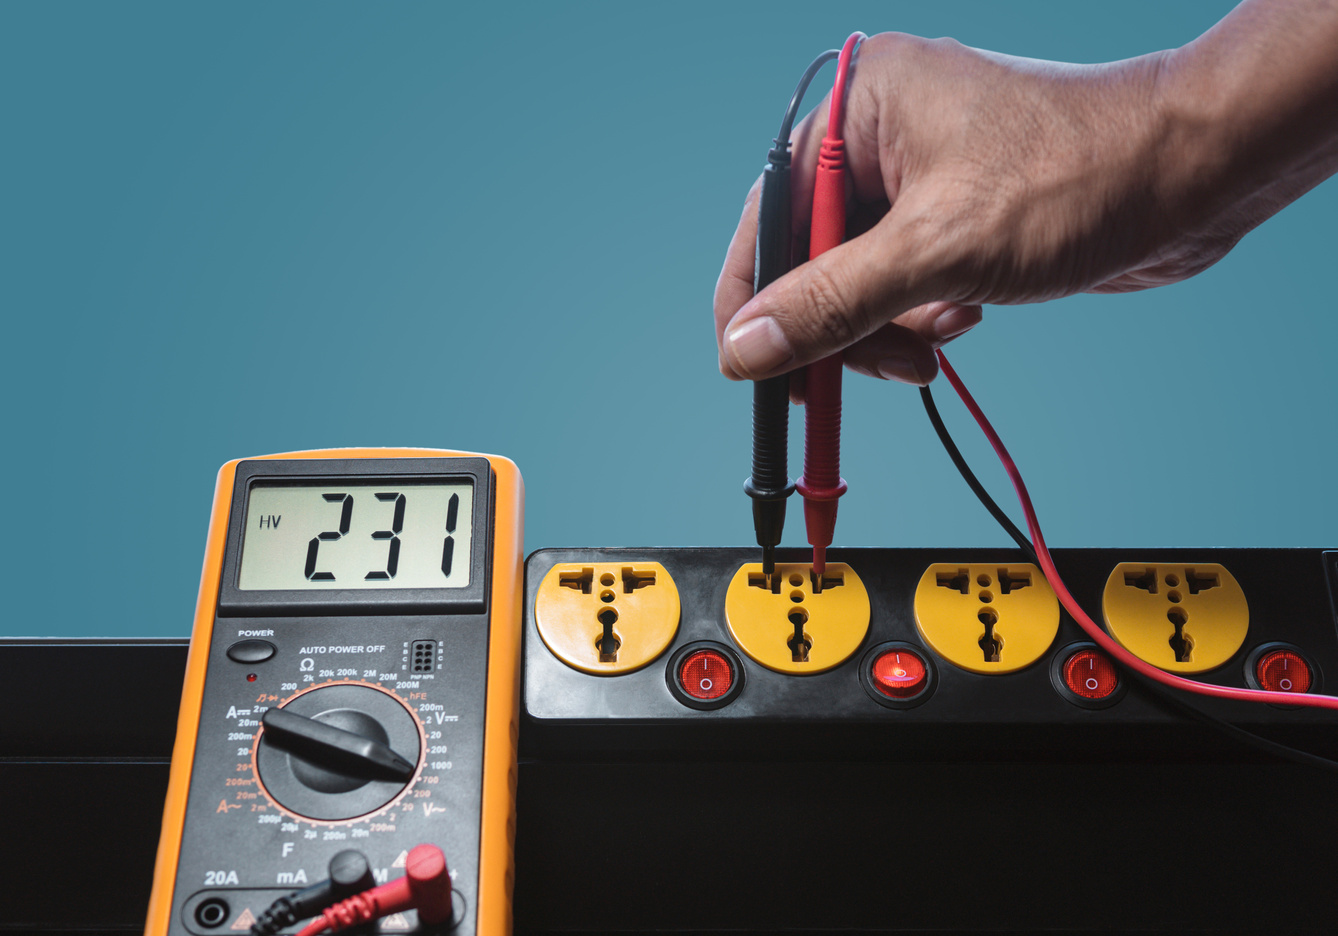 Hand Measuring the Voltage of Power Outlet Using Voltmeter 